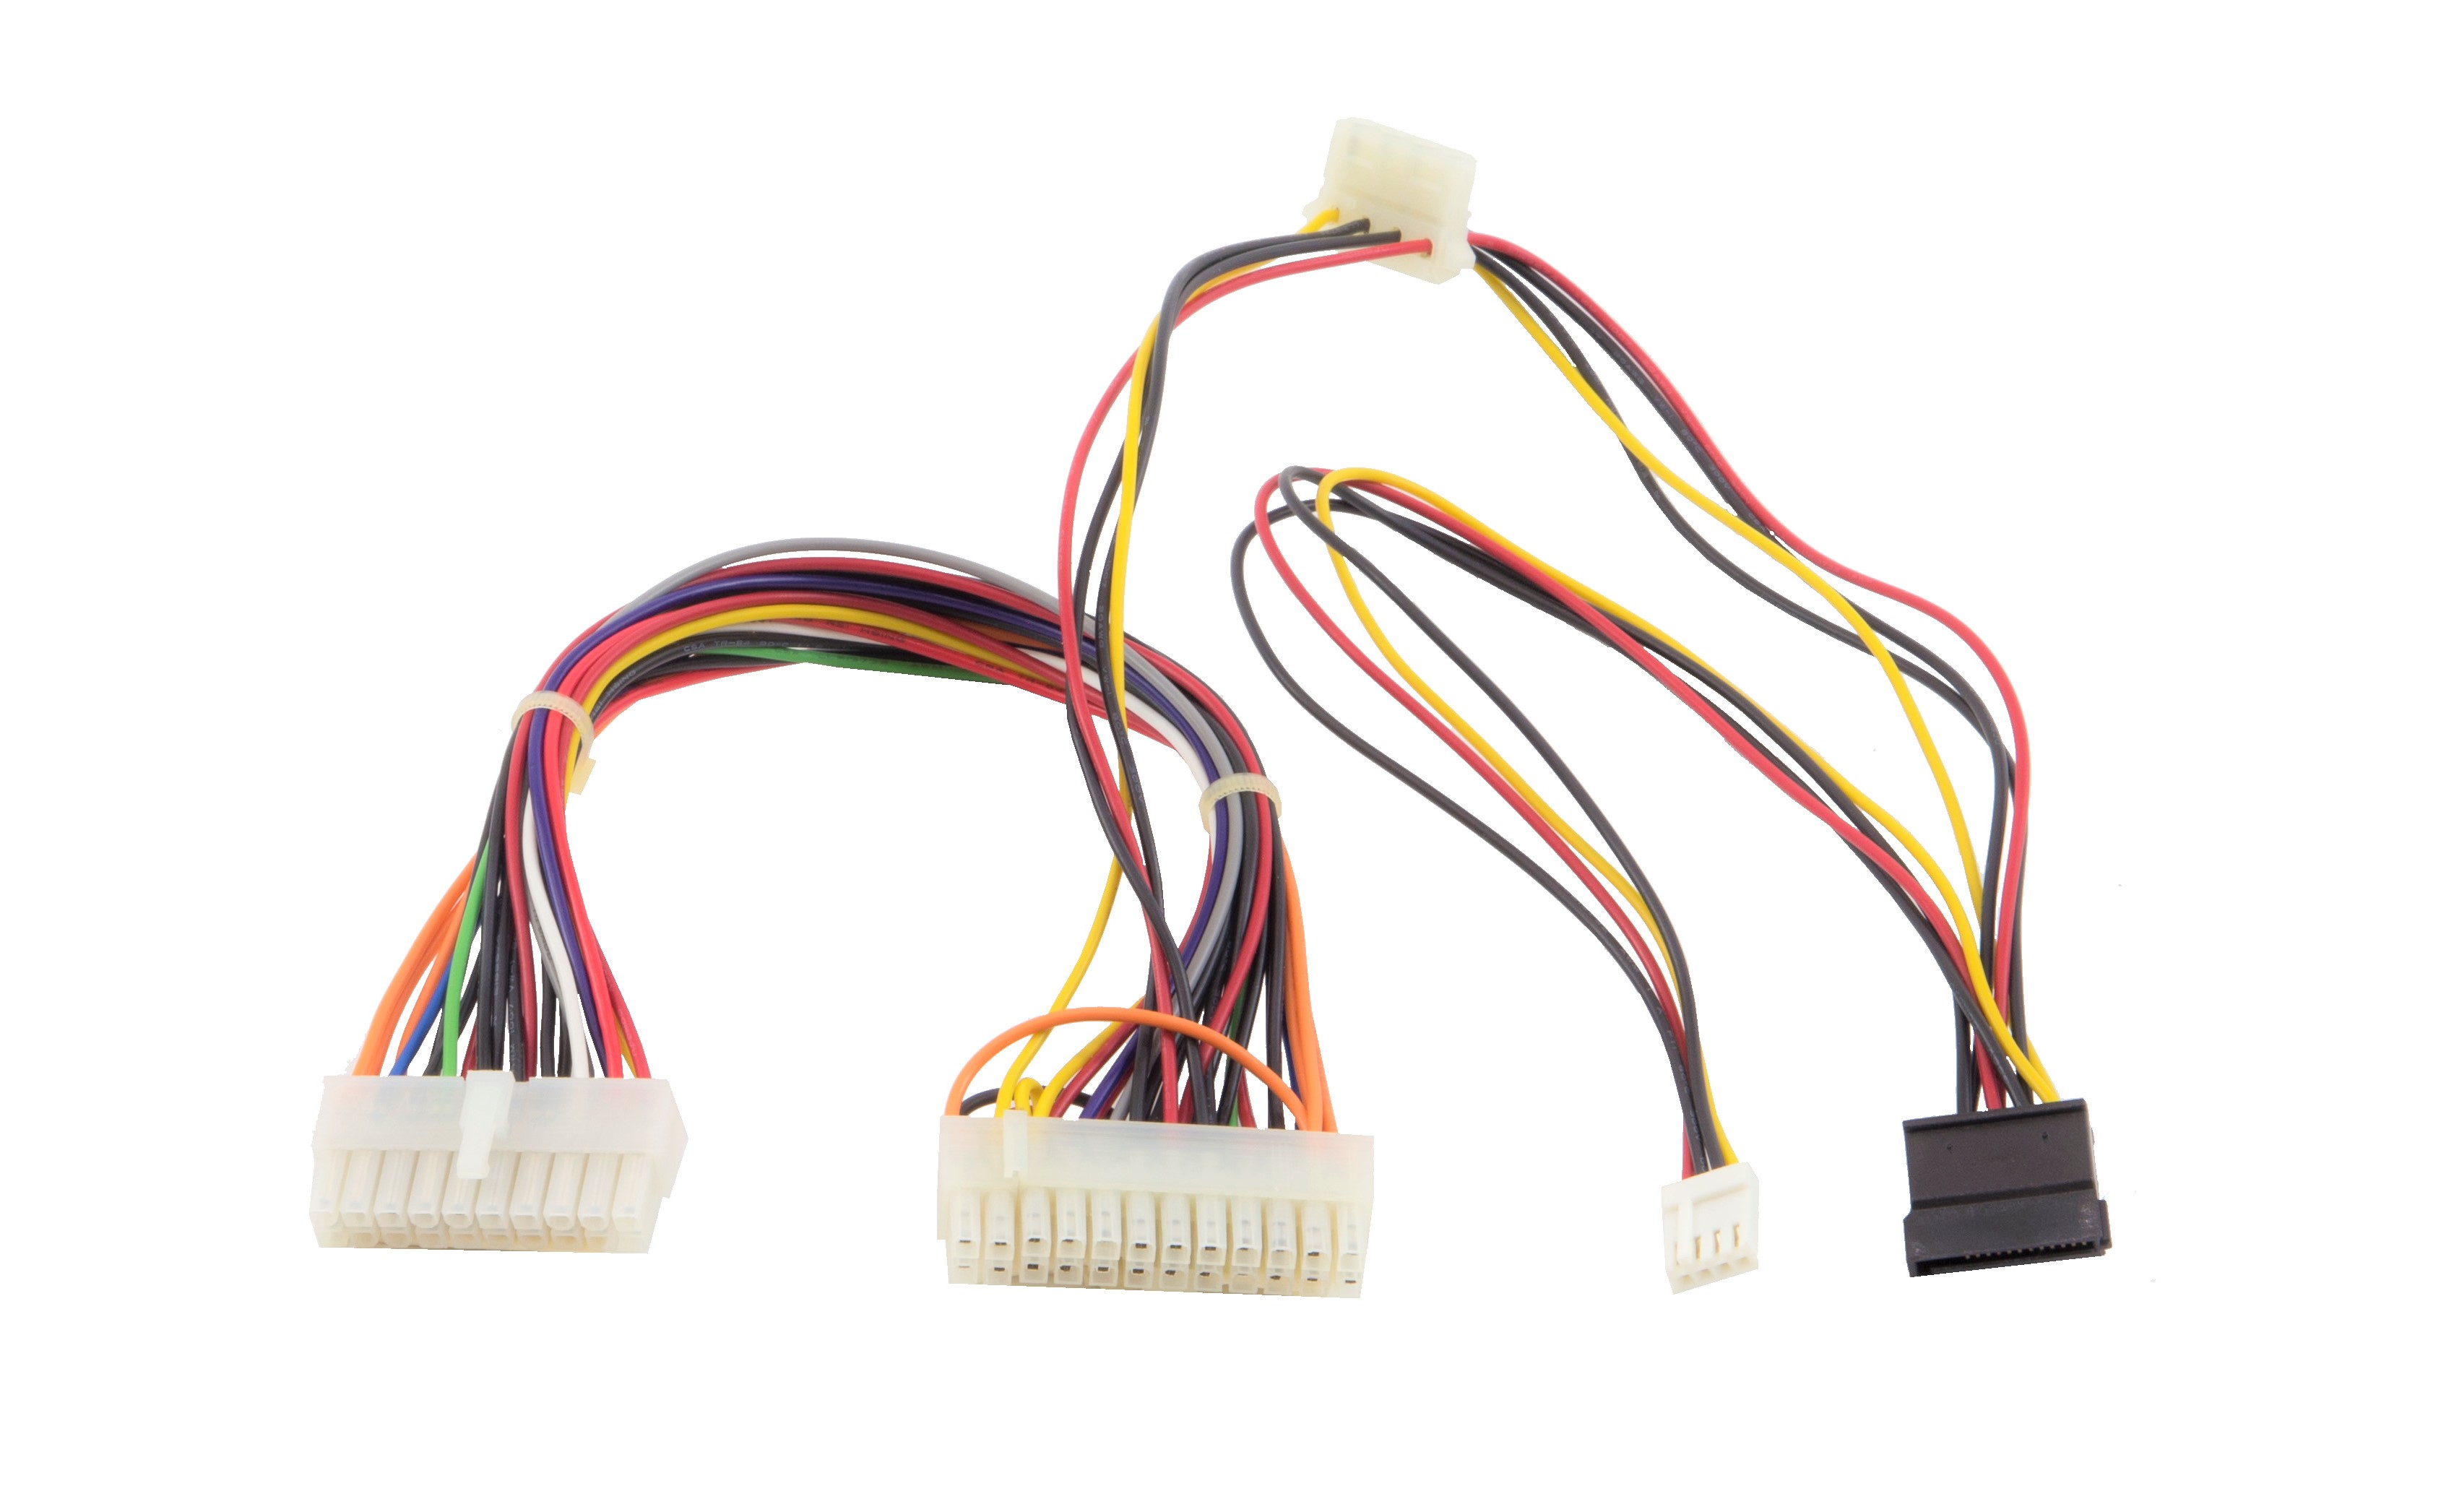 20-24 ATX+SATA CABLE  |Products|Accessories|Cable & Cord